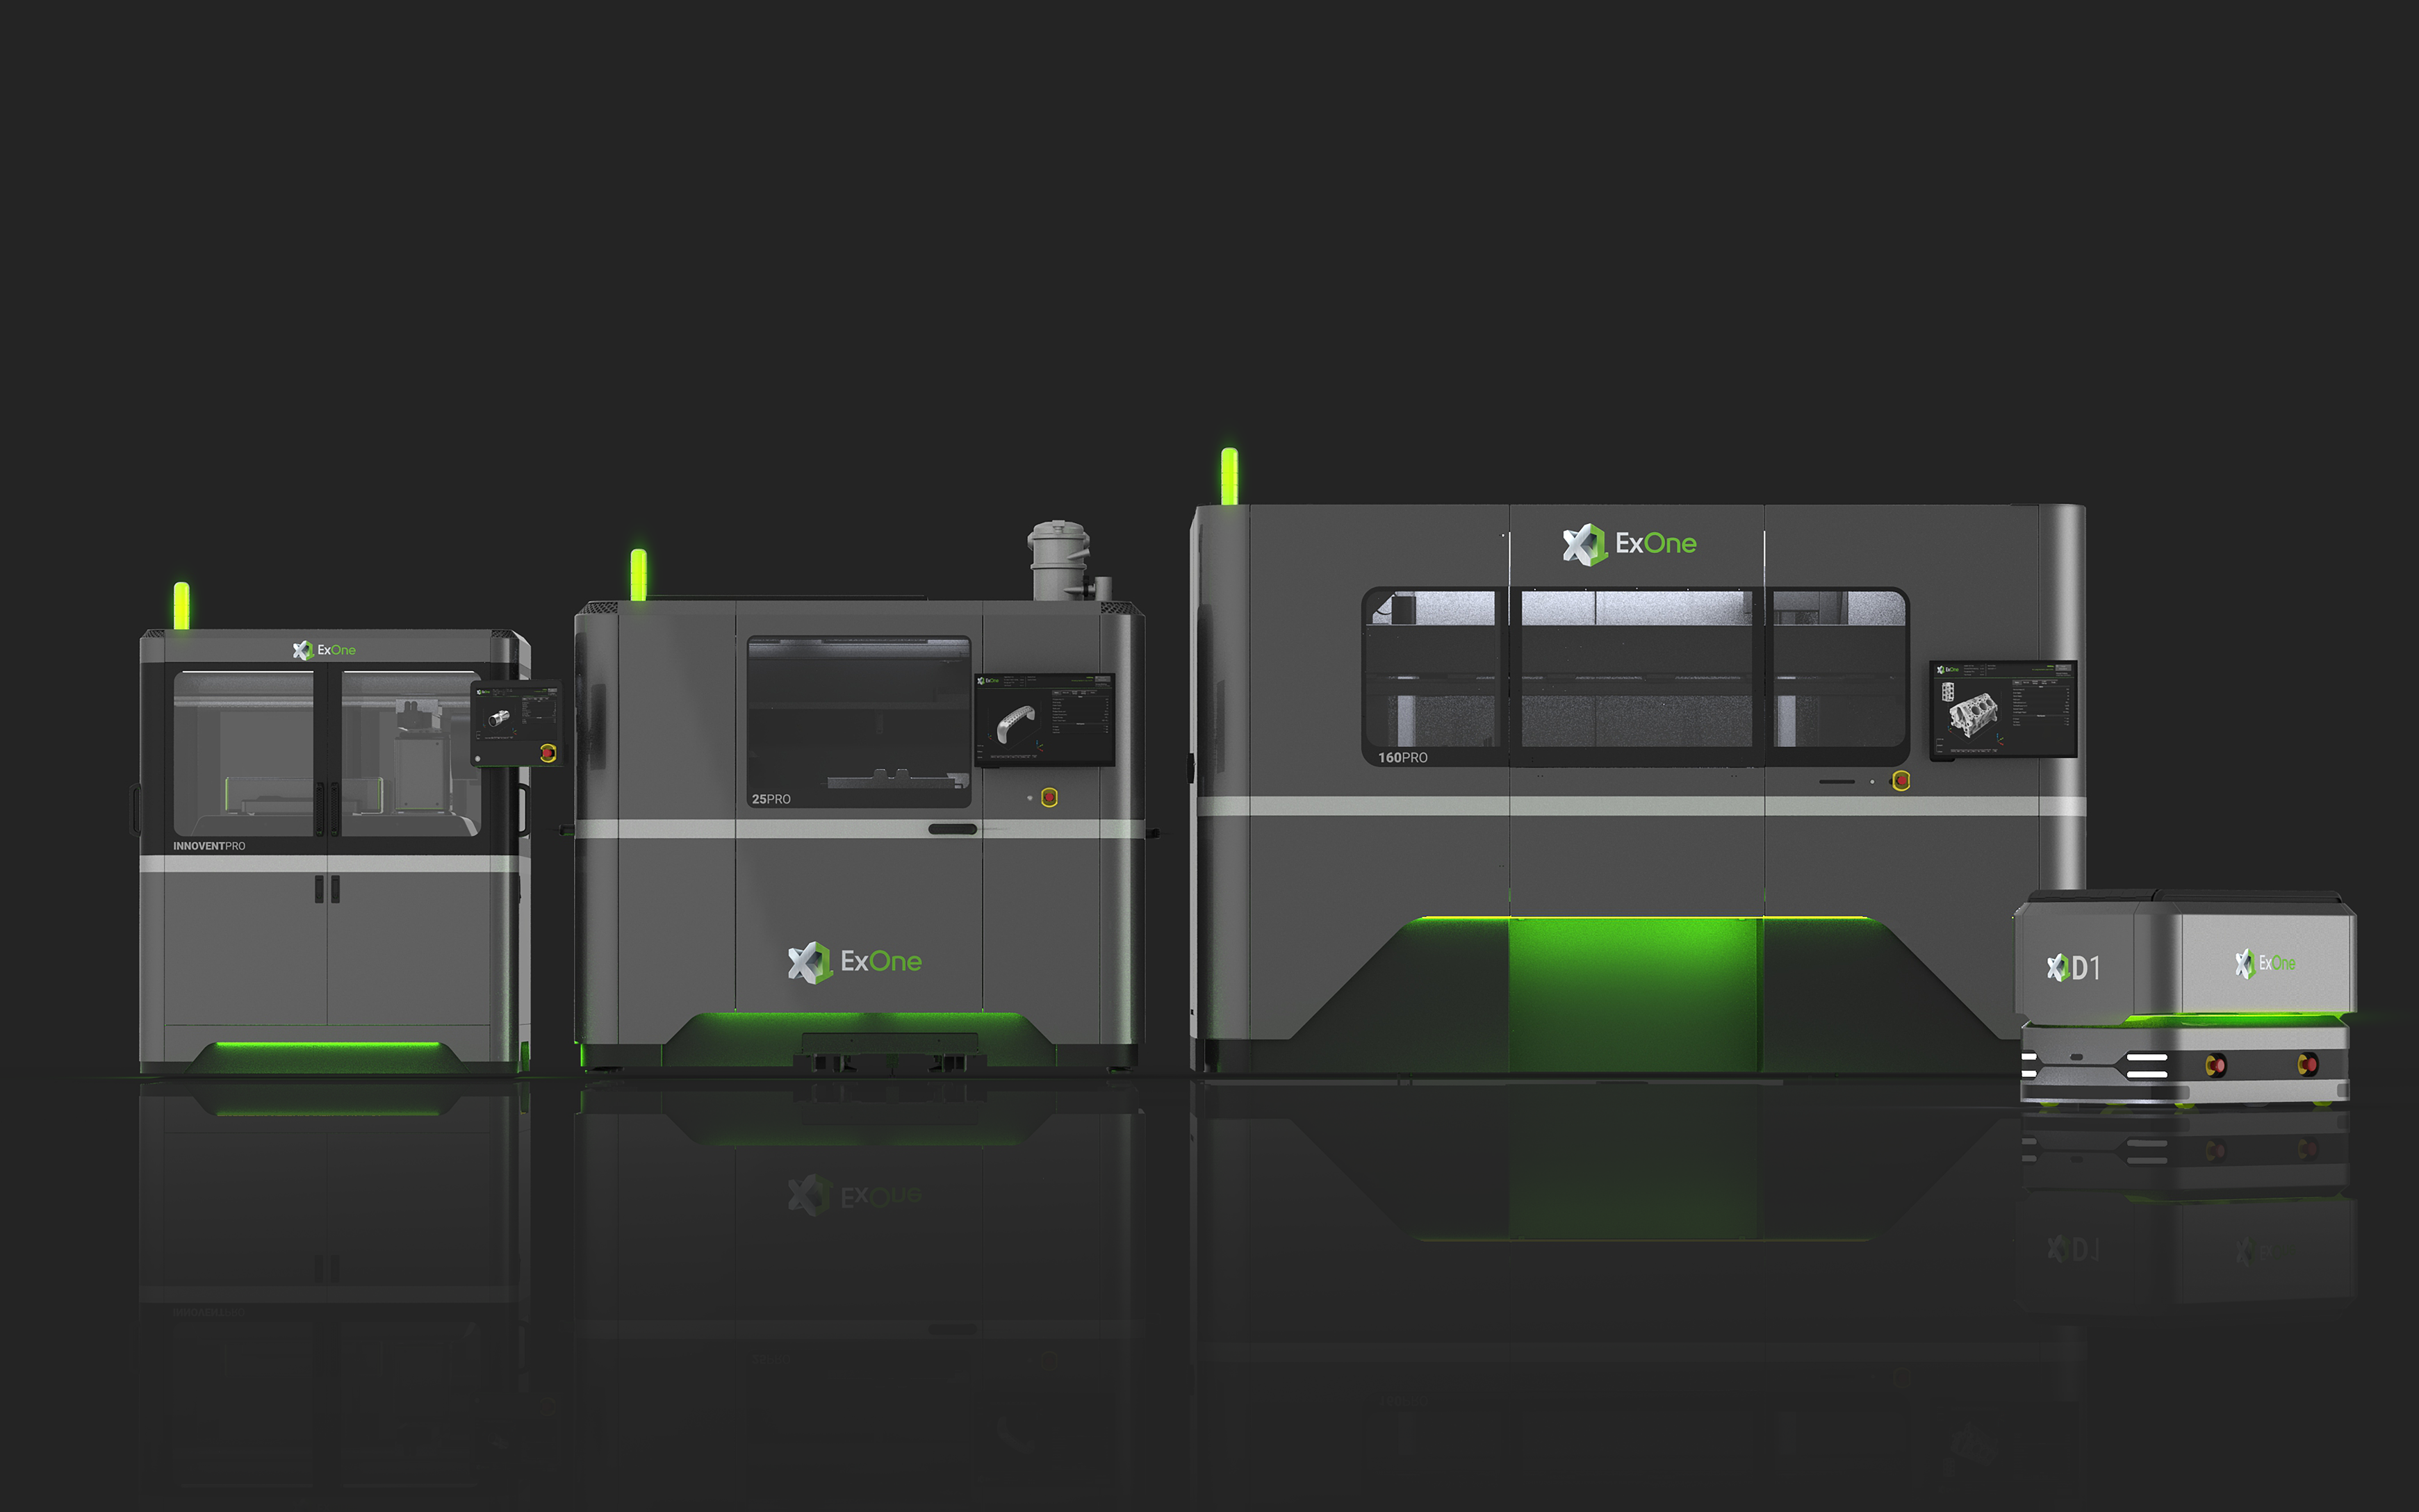 The InnoventPro (left) is an advanced entry-level metal 3d printer that rounds out ExOne’s full family of production metal binder jetting systems, which includes the X1 25Pro (center), the X1 160Pro (far right), and the X1D1 automated guided vehicle for automated, Industry 4.0 transport. Image via ExOne.